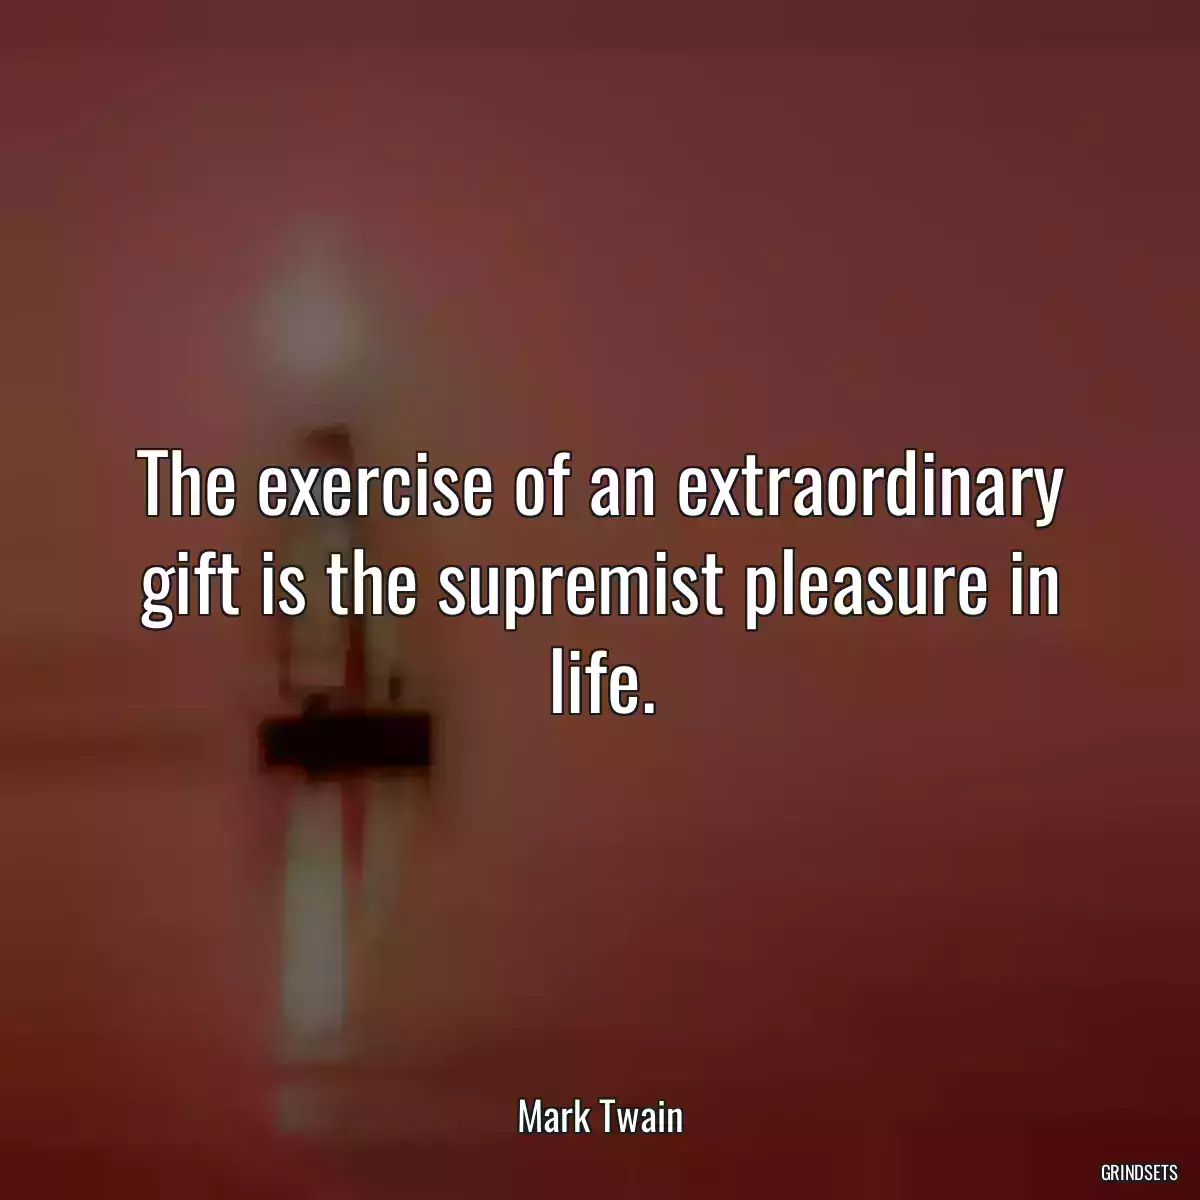 The exercise of an extraordinary gift is the supremist pleasure in life.